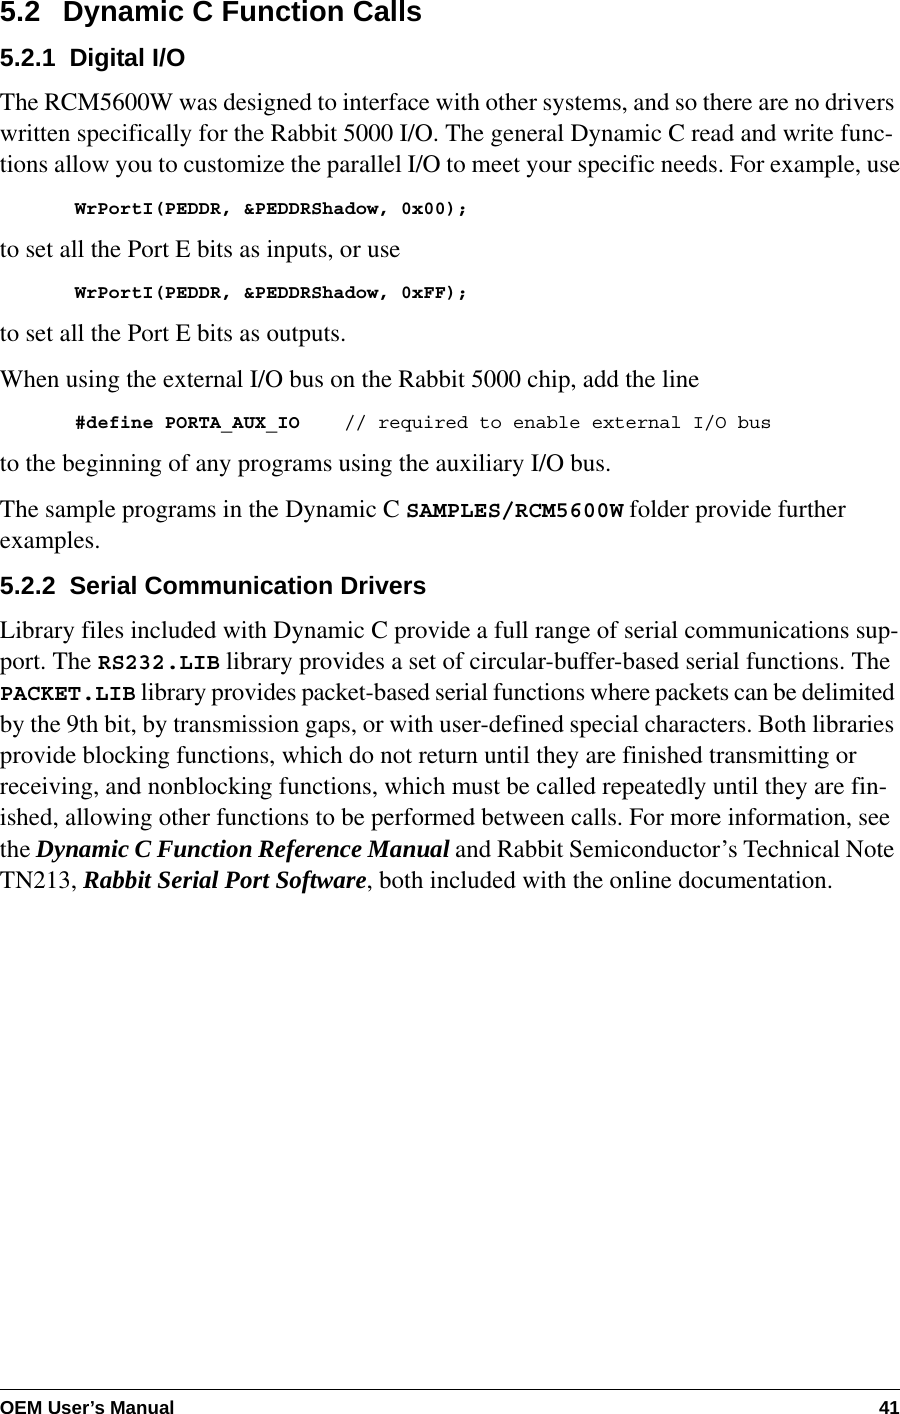 OEM User’s Manual 415.2   Dynamic C Function Calls5.2.1  Digital I/OThe RCM5600W was designed to interface with other systems, and so there are no drivers written specifically for the Rabbit 5000 I/O. The general Dynamic C read and write func-tions allow you to customize the parallel I/O to meet your specific needs. For example, useWrPortI(PEDDR, &amp;PEDDRShadow, 0x00);to set all the Port E bits as inputs, or useWrPortI(PEDDR, &amp;PEDDRShadow, 0xFF);to set all the Port E bits as outputs.When using the external I/O bus on the Rabbit 5000 chip, add the line#define PORTA_AUX_IO    // required to enable external I/O busto the beginning of any programs using the auxiliary I/O bus.The sample programs in the Dynamic C SAMPLES/RCM5600W folder provide further examples.5.2.2  Serial Communication DriversLibrary files included with Dynamic C provide a full range of serial communications sup-port. The RS232.LIB library provides a set of circular-buffer-based serial functions. The PACKET.LIB library provides packet-based serial functions where packets can be delimited by the 9th bit, by transmission gaps, or with user-defined special characters. Both libraries provide blocking functions, which do not return until they are finished transmitting or receiving, and nonblocking functions, which must be called repeatedly until they are fin-ished, allowing other functions to be performed between calls. For more information, see the Dynamic C Function Reference Manual and Rabbit Semiconductor’s Technical Note TN213, Rabbit Serial Port Software, both included with the online documentation.